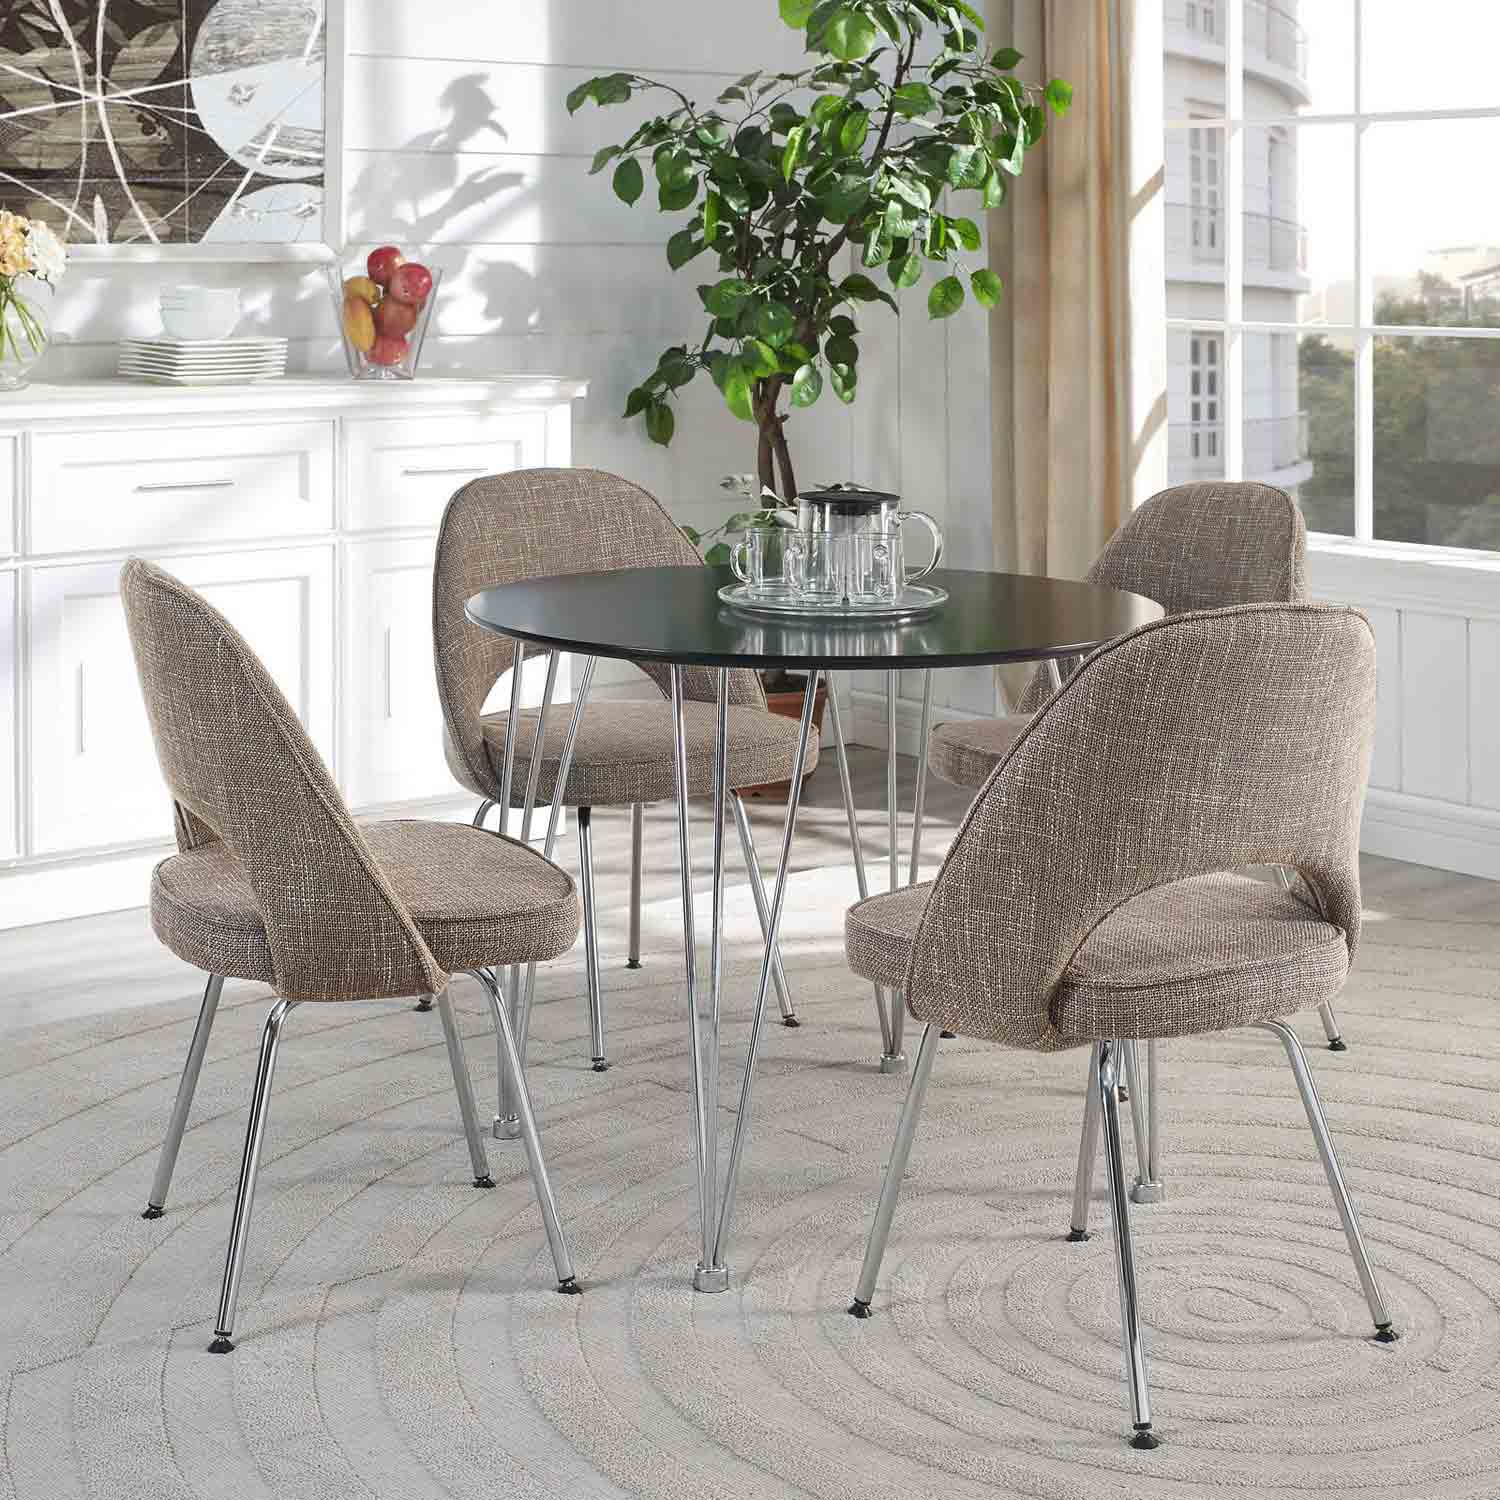 Modway Cordelia Dining Chairs Set of 4 - Oat